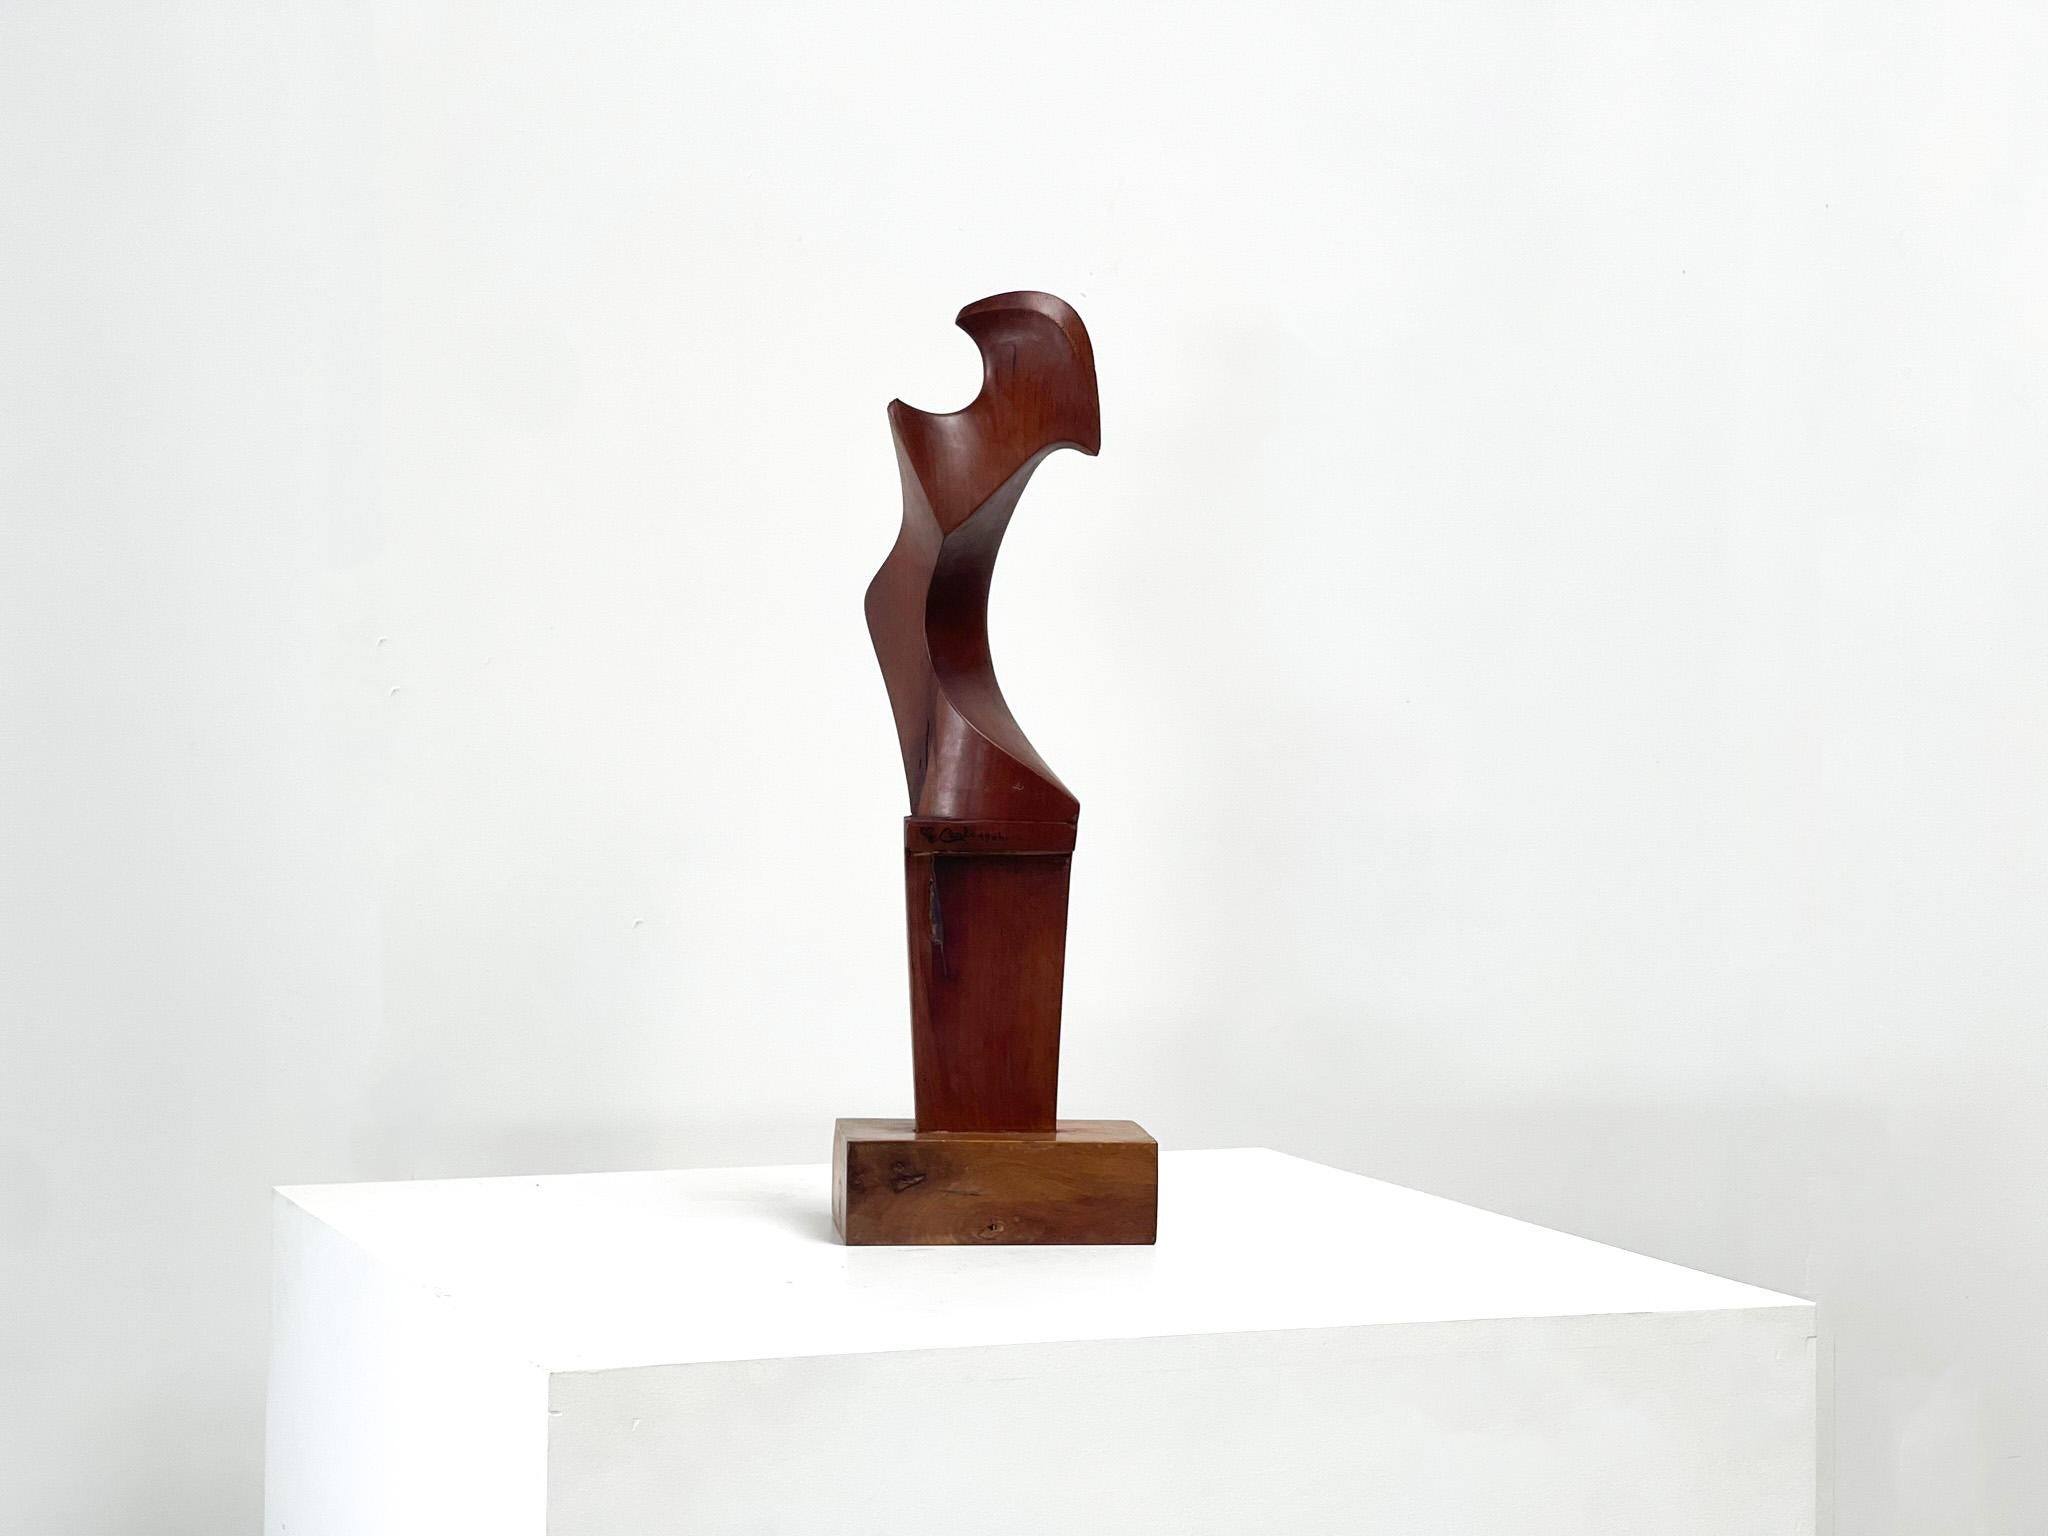 Very nicely designed wooden sculpture by Giuseppe Carli. The sculpture was made in the year 1964.  The sculpture is dated and signed. Carli was a Venetian sculptor who became very famous for his wooden sculptures. His sculptures and works can be